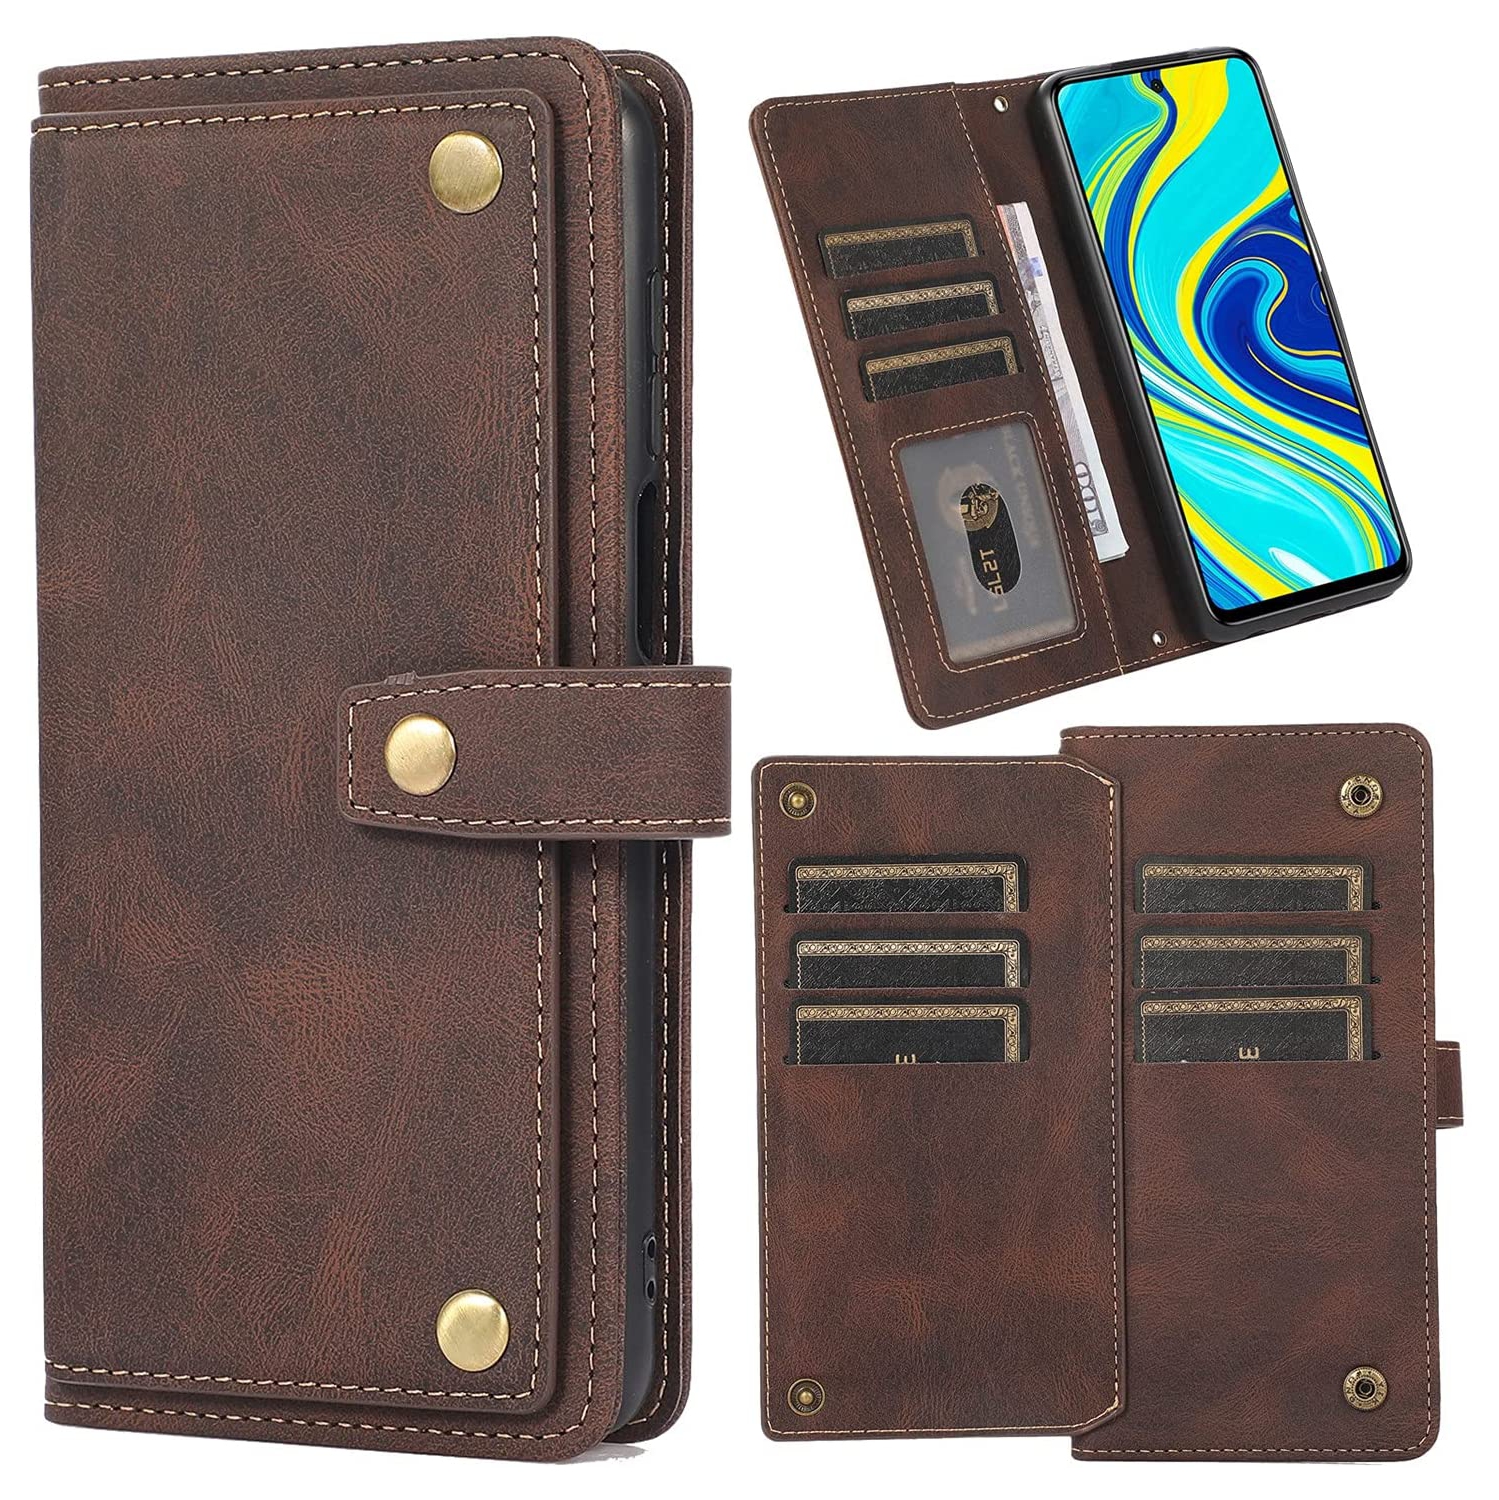 Loris & Case Retro Flip Wallet Case with 9 Card Slots Kickstand PU Leather Folio Wrist Strap Purse Phone Cover for Samsung Galaxy S22 ULTRA -Brown (FREE SHIPPING)